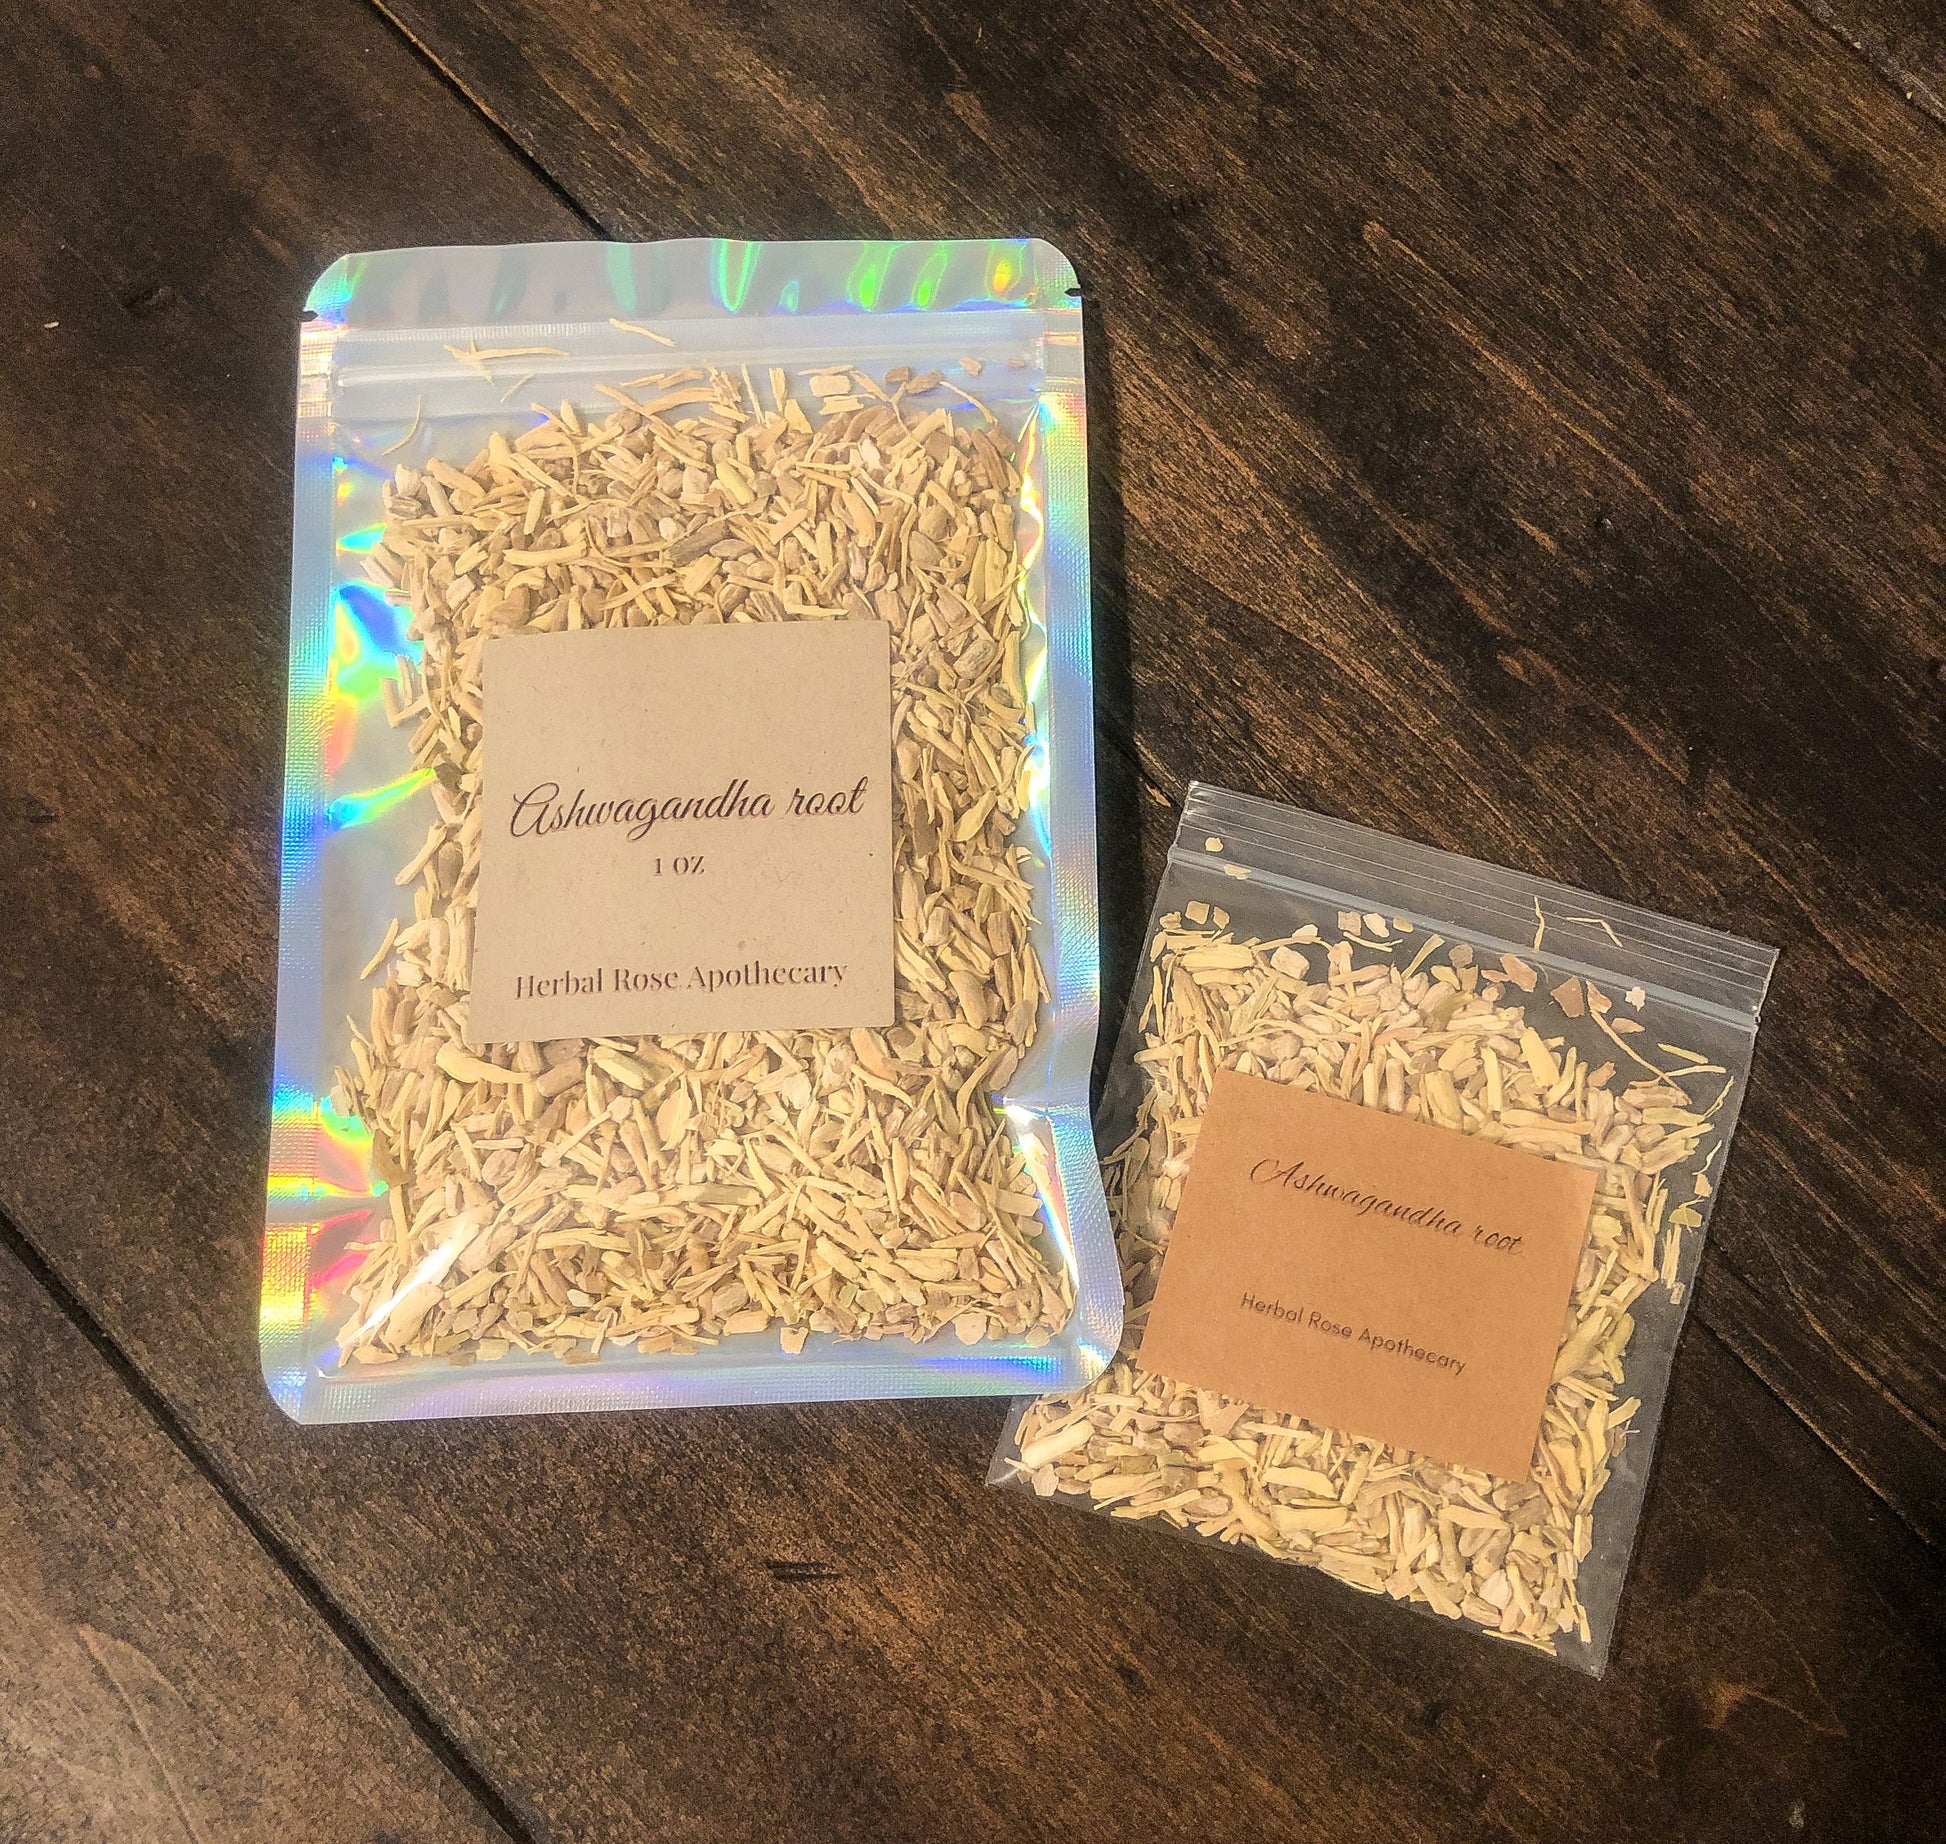 ashwagandha root 8g and 1oz in clear bags on wooden background